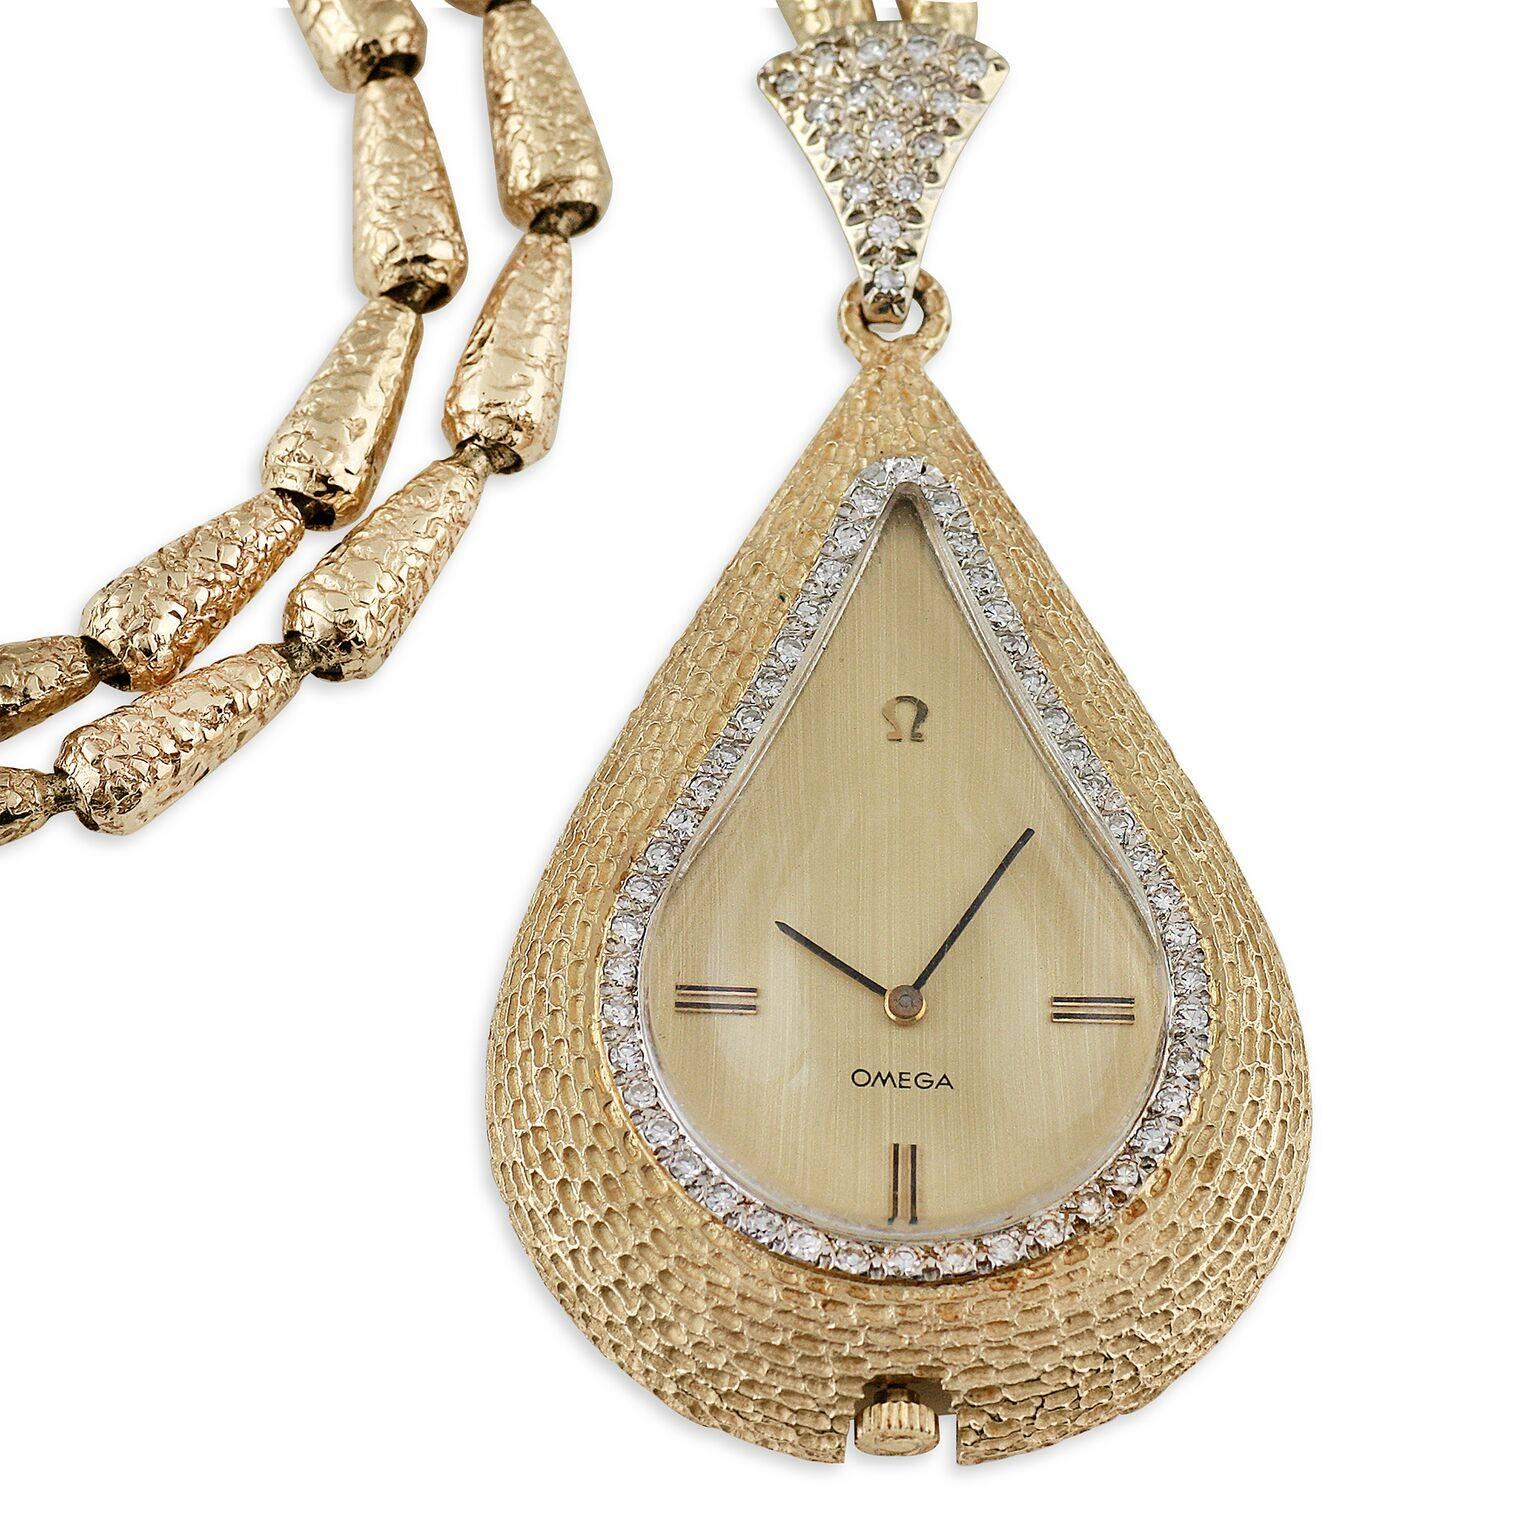 An early 1970's Omega Pendant Necklace Watch design. Hammered and textured yellow gold with diamond-set bezel. A very rare and unique piece.